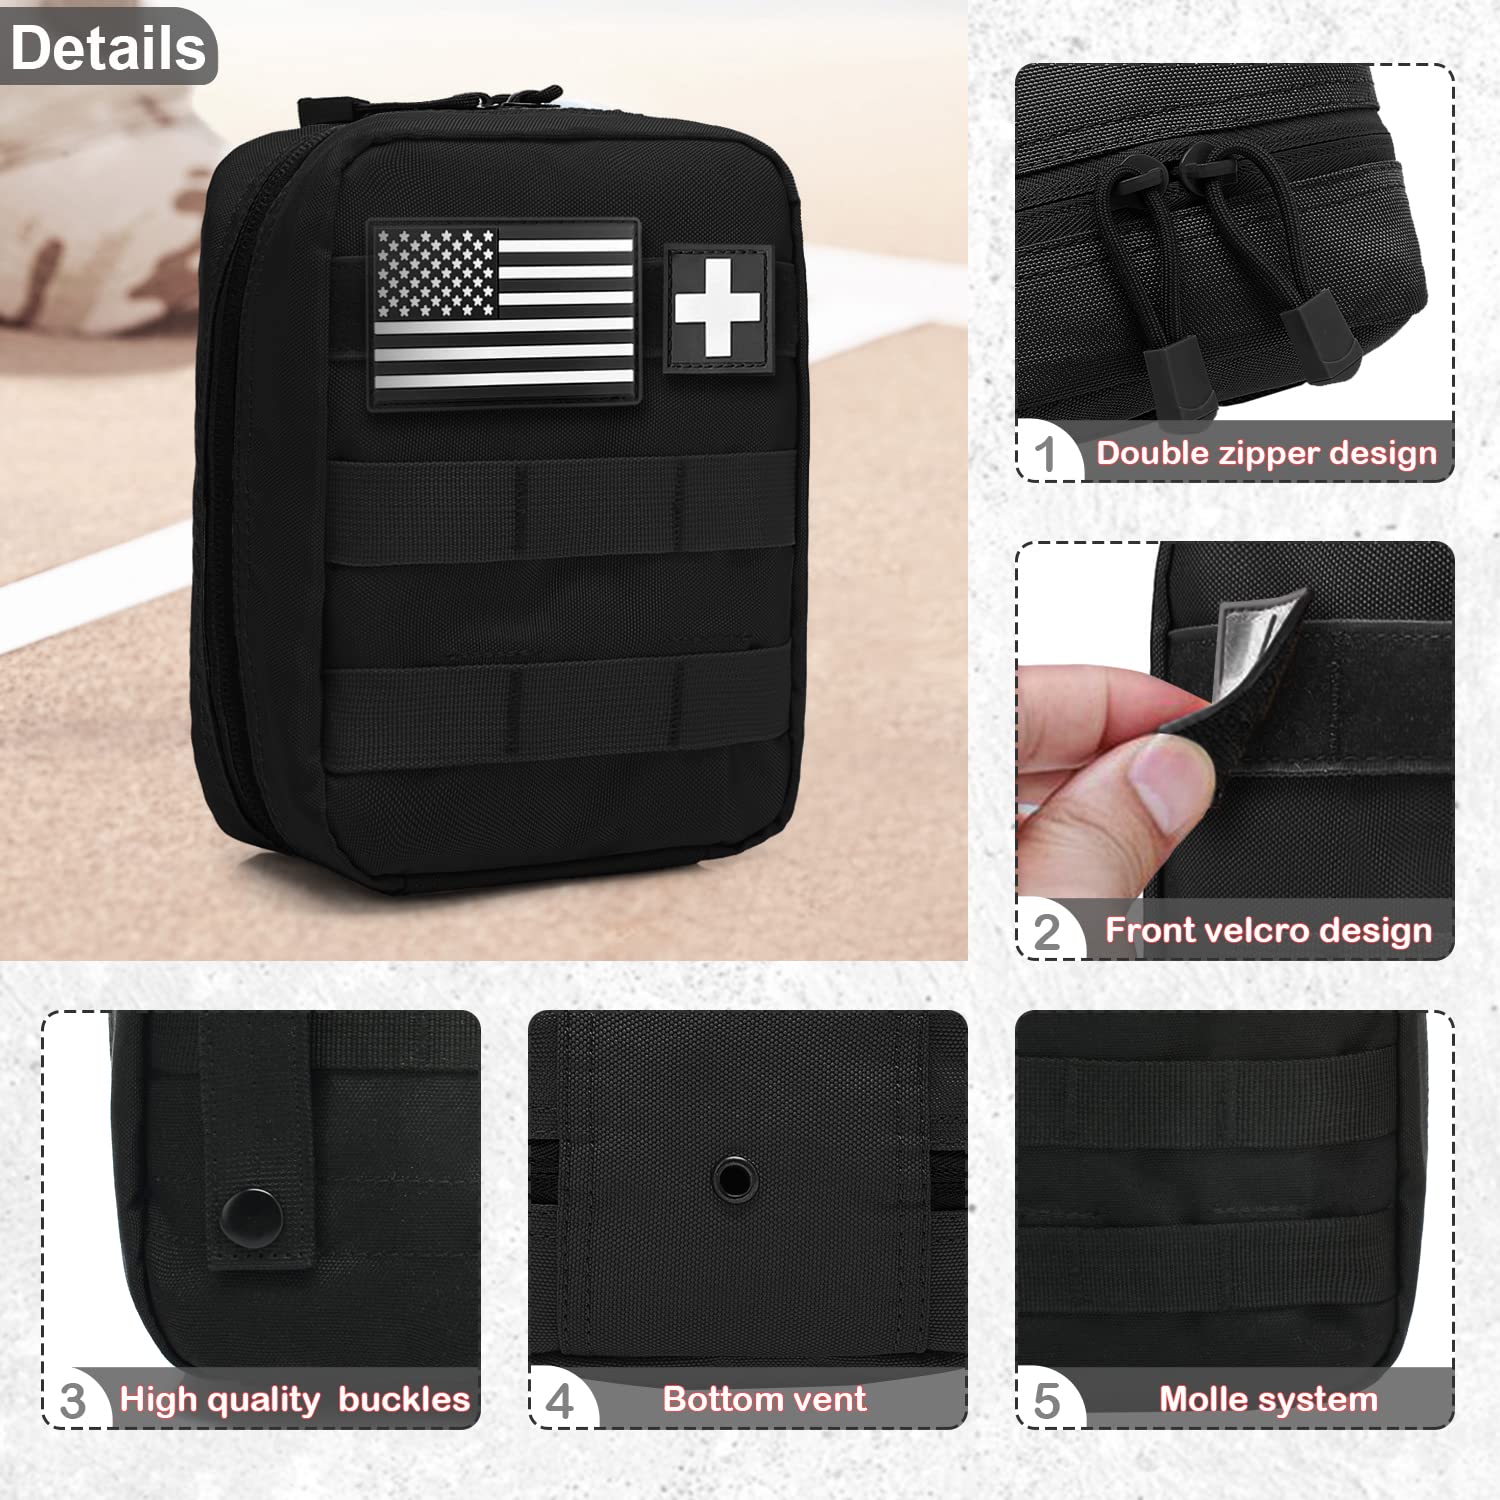 ThreePigeons™ Tactical Medical Pouch  - Backpacking and Emergency Supplies